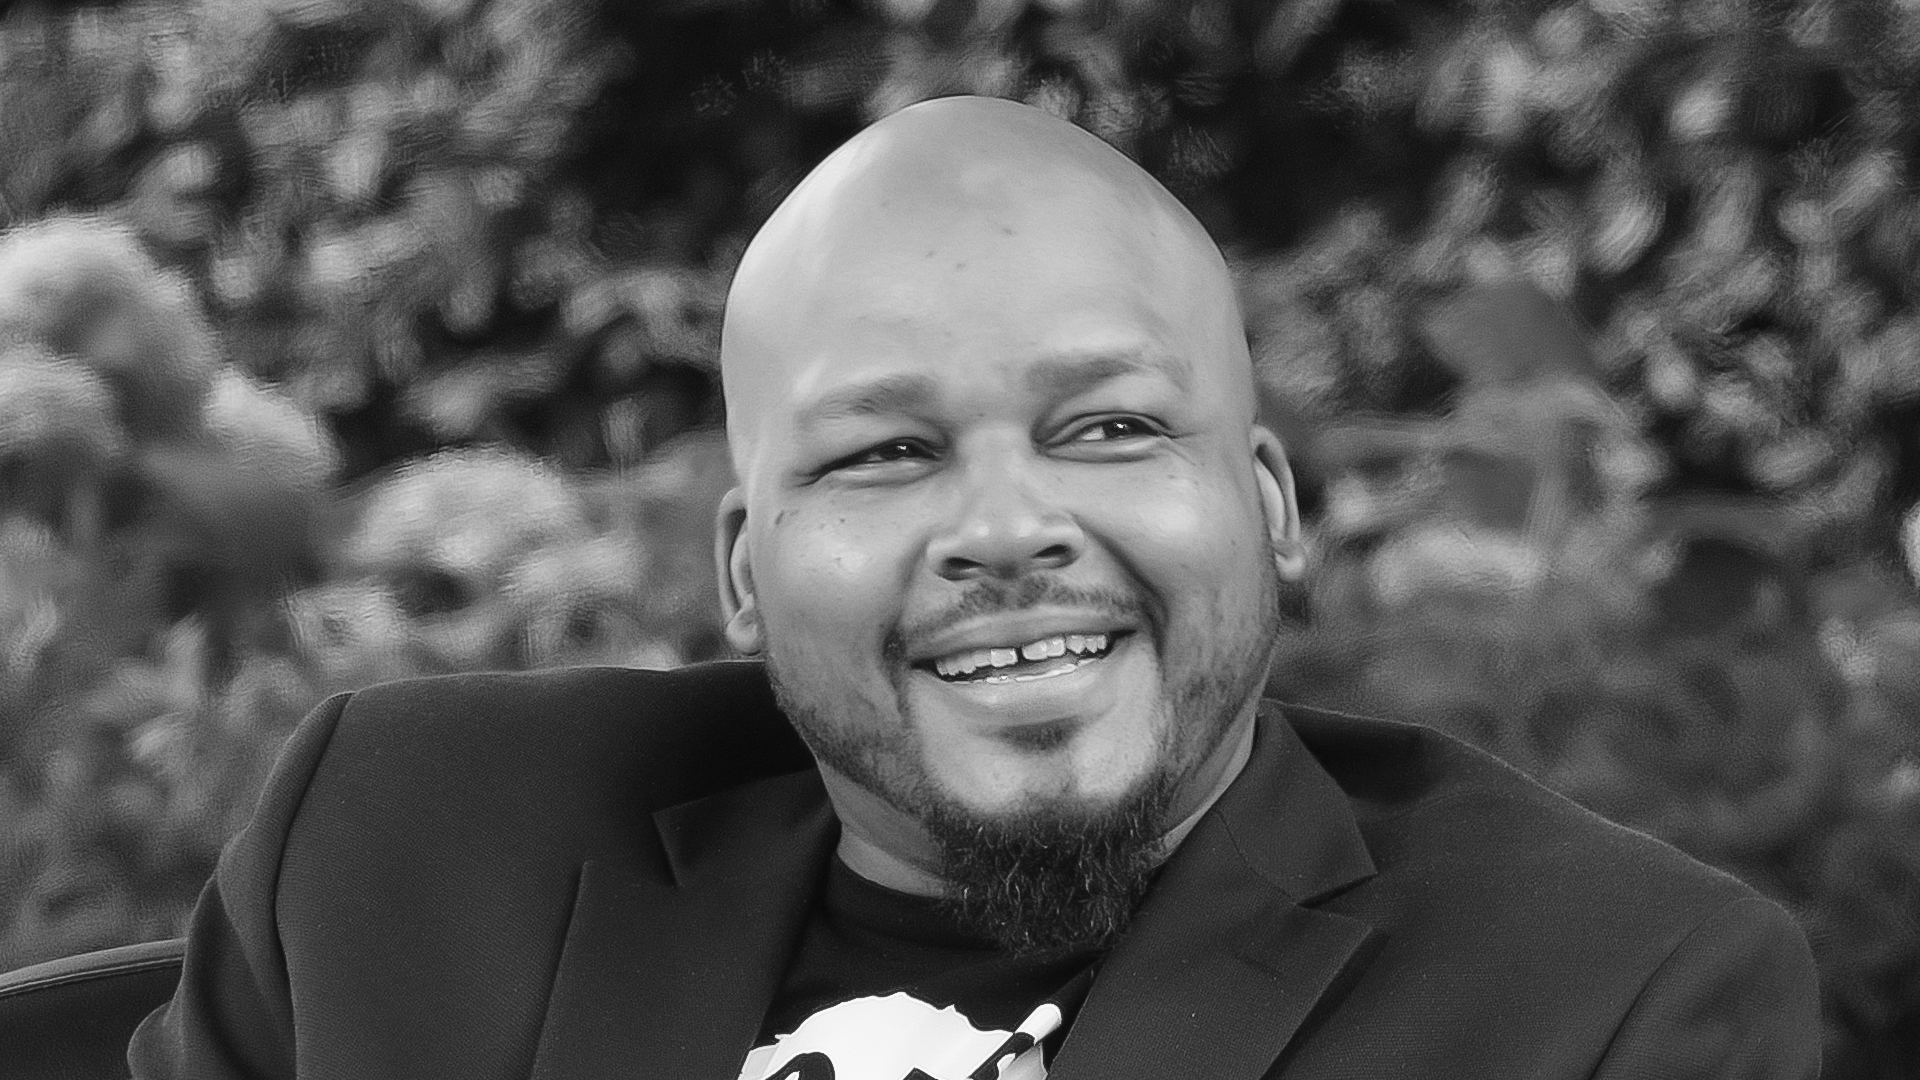 Miguel Hampton is a published photographer and an award winning community business advocate with a diverse managerial background.